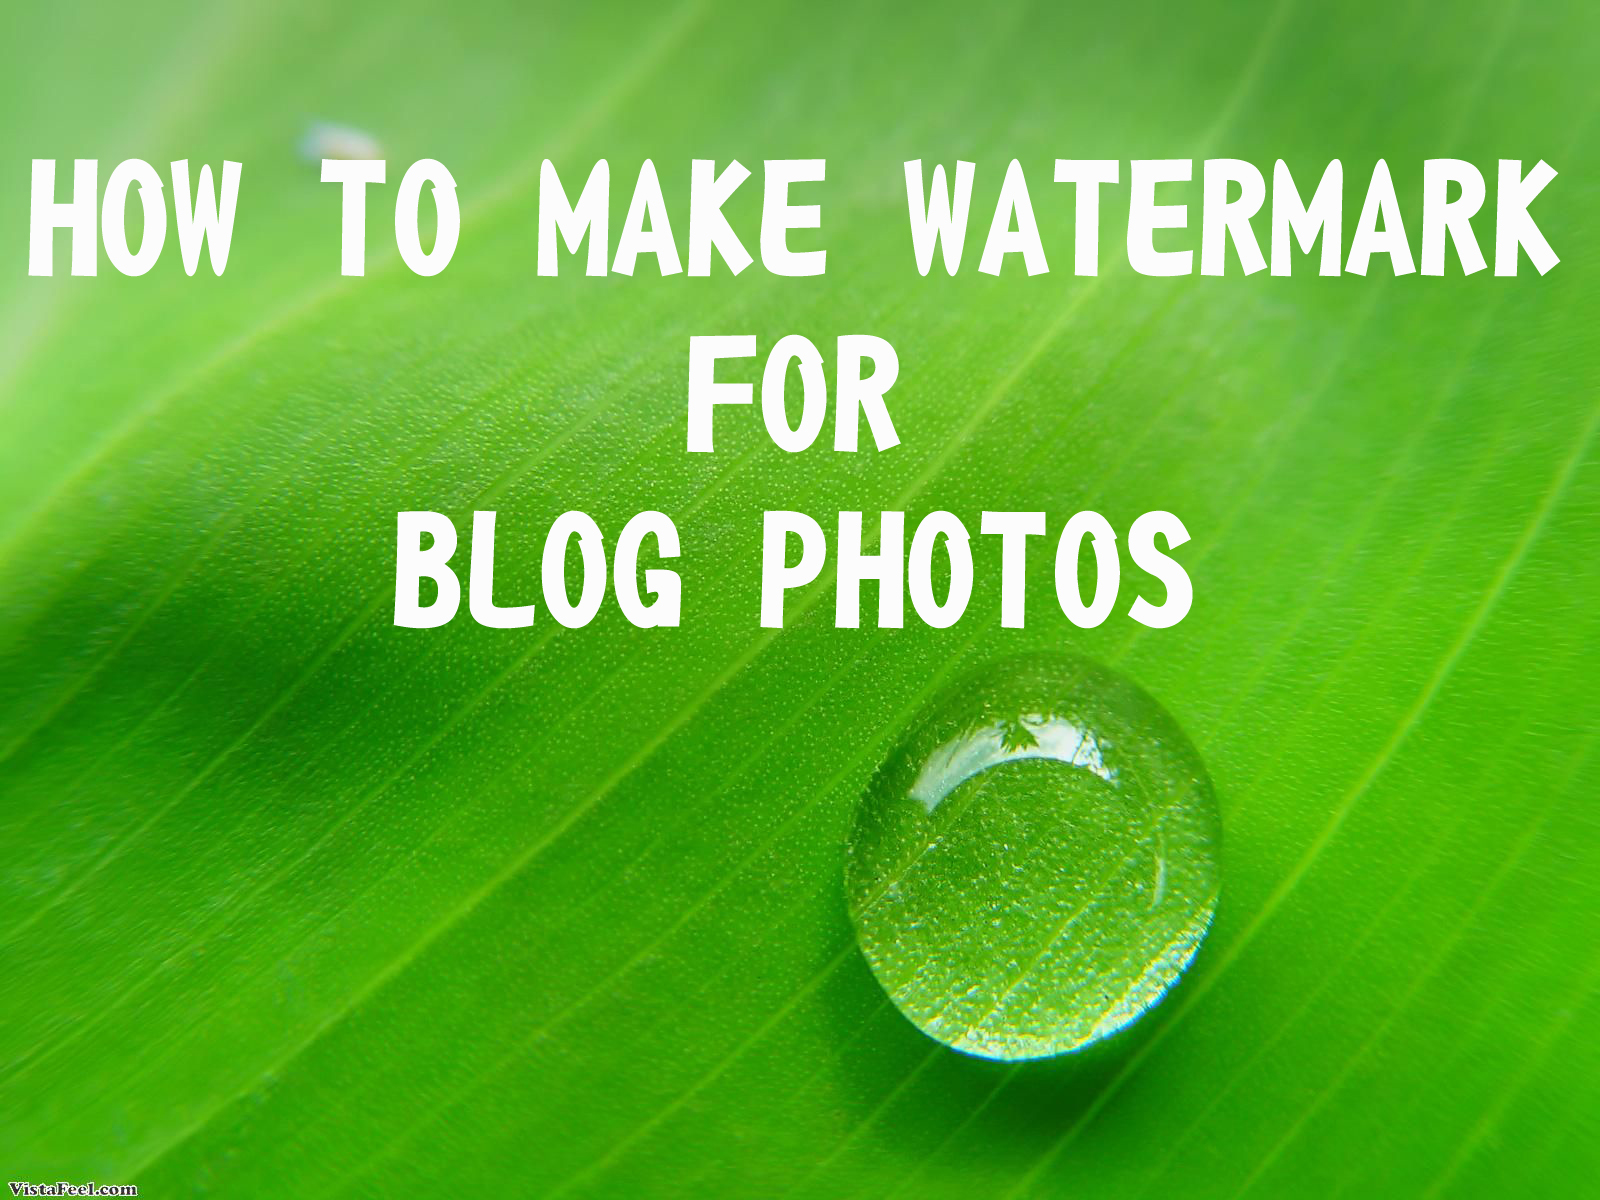 How to Make watermark for blog photos #16